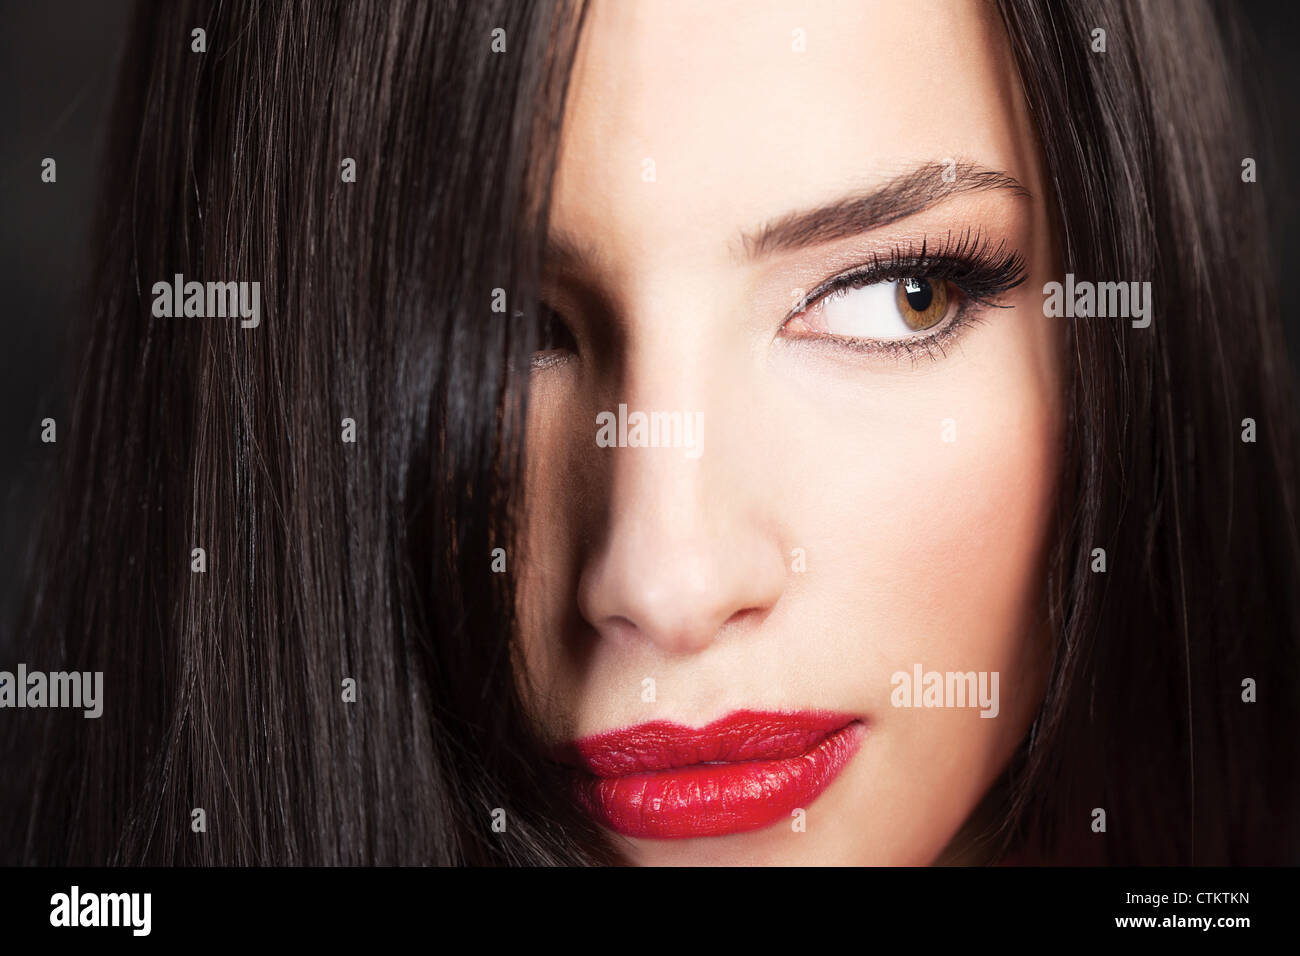 Close up of a pretty woman's face Stock Photo